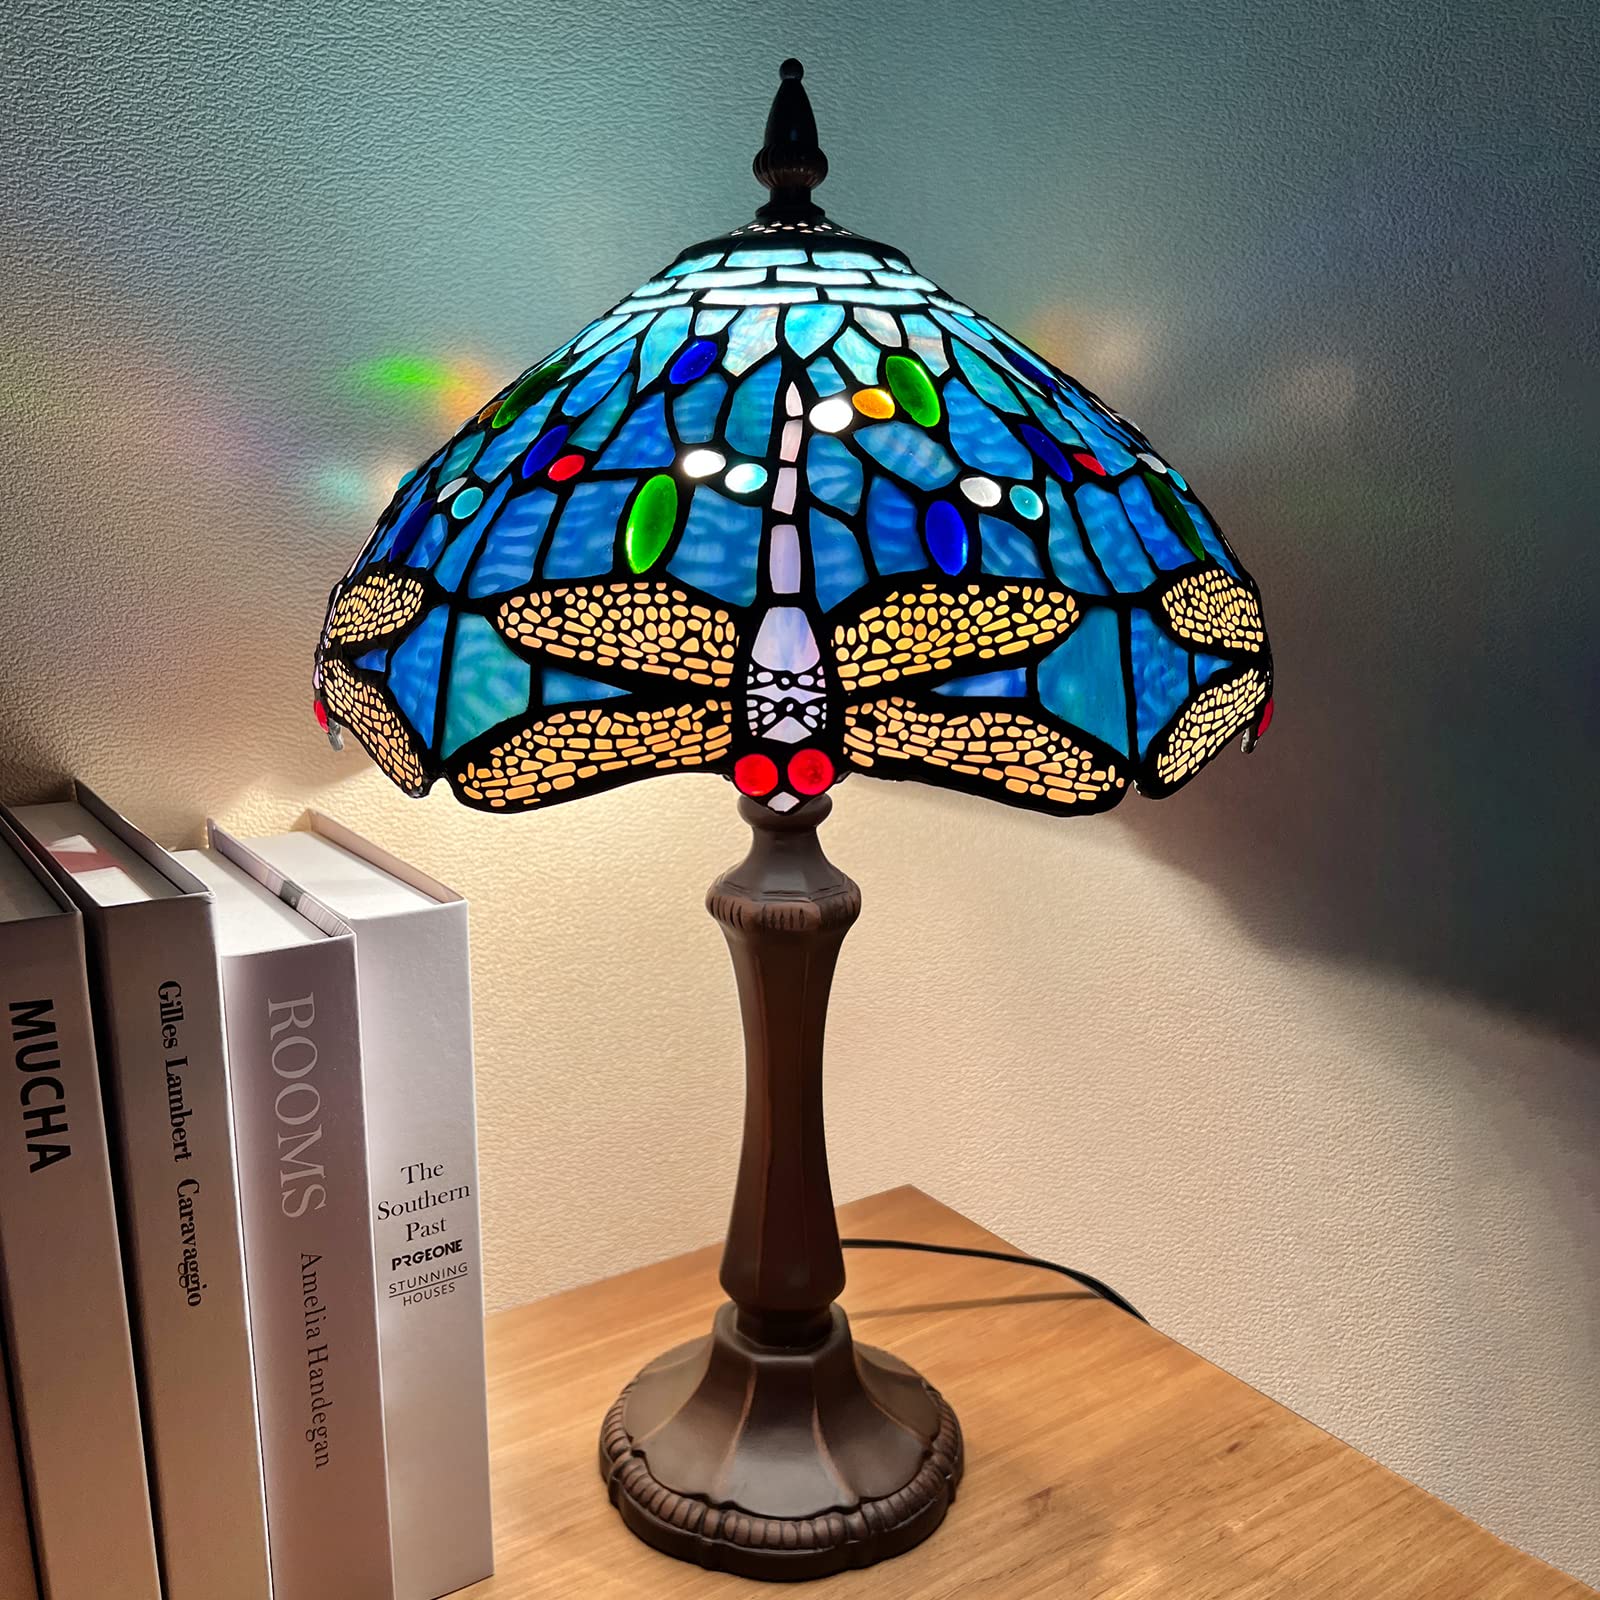 Vinplus Tiffany Lamp Table Lamp Blue Dragonfly Style Reading Desk Lamp 19" Tall - image 1 of 6